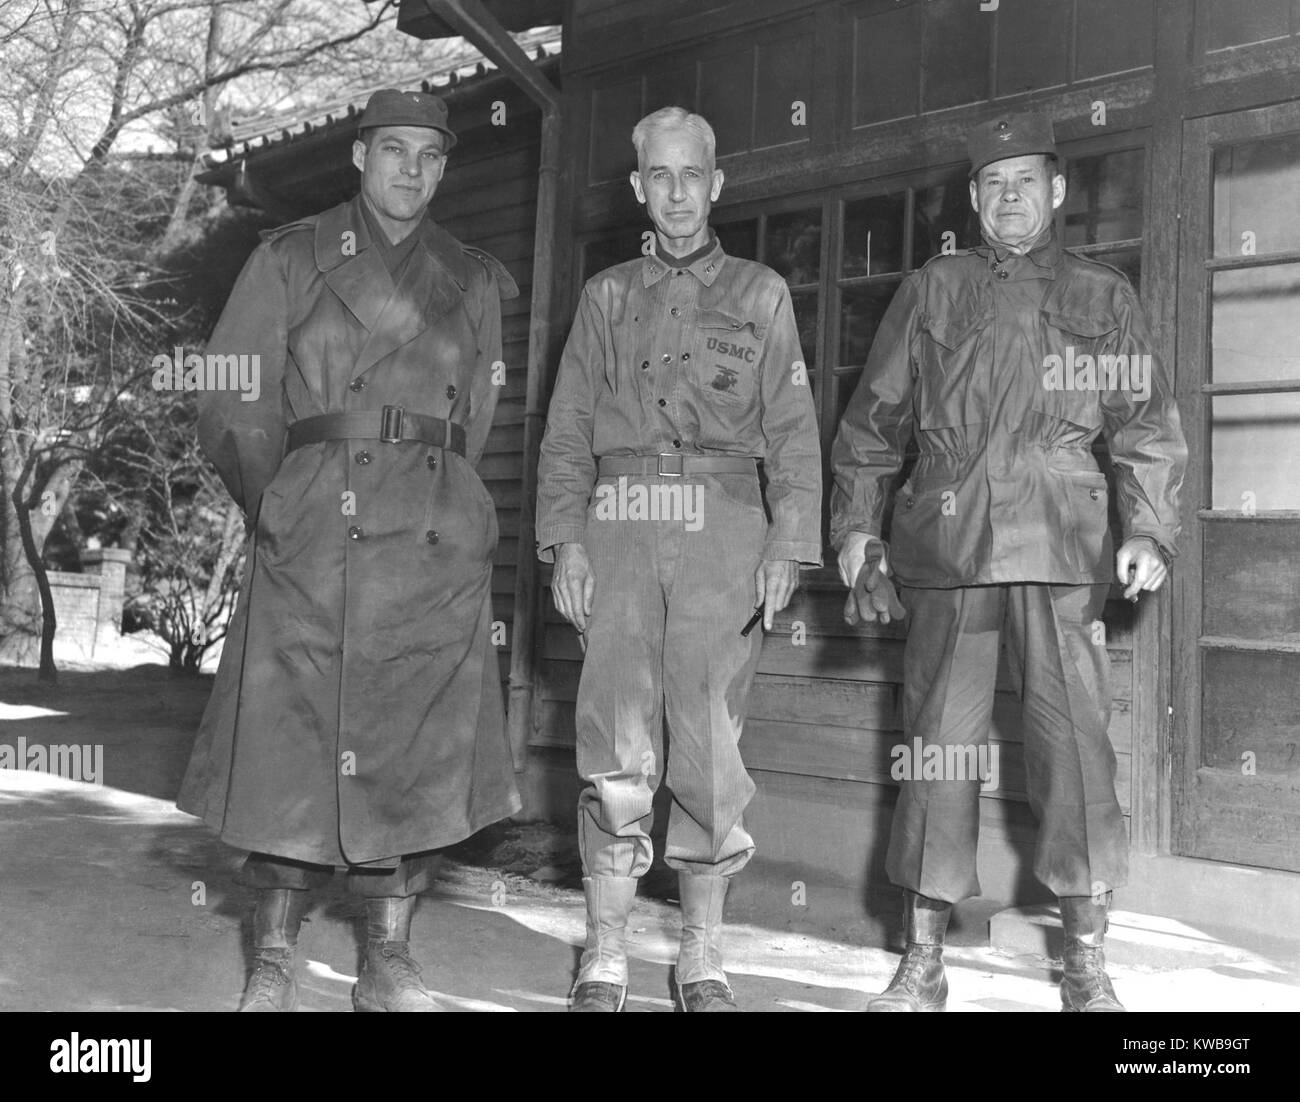 Major General Oliver Smith with Lieutenant Colonel Ray Murray, left, and Colonel Lewis Puller, right, Christmas, 1950. These three seasoned commanders lead their troops wisely in the face of unrealistic ambitions of the senior commanders Major Gen. Ned Almond and Commander in Chief, Douglas MacArthur. Korean War, 1950-53. (BSLOC 2014 11 98) Stock Photo